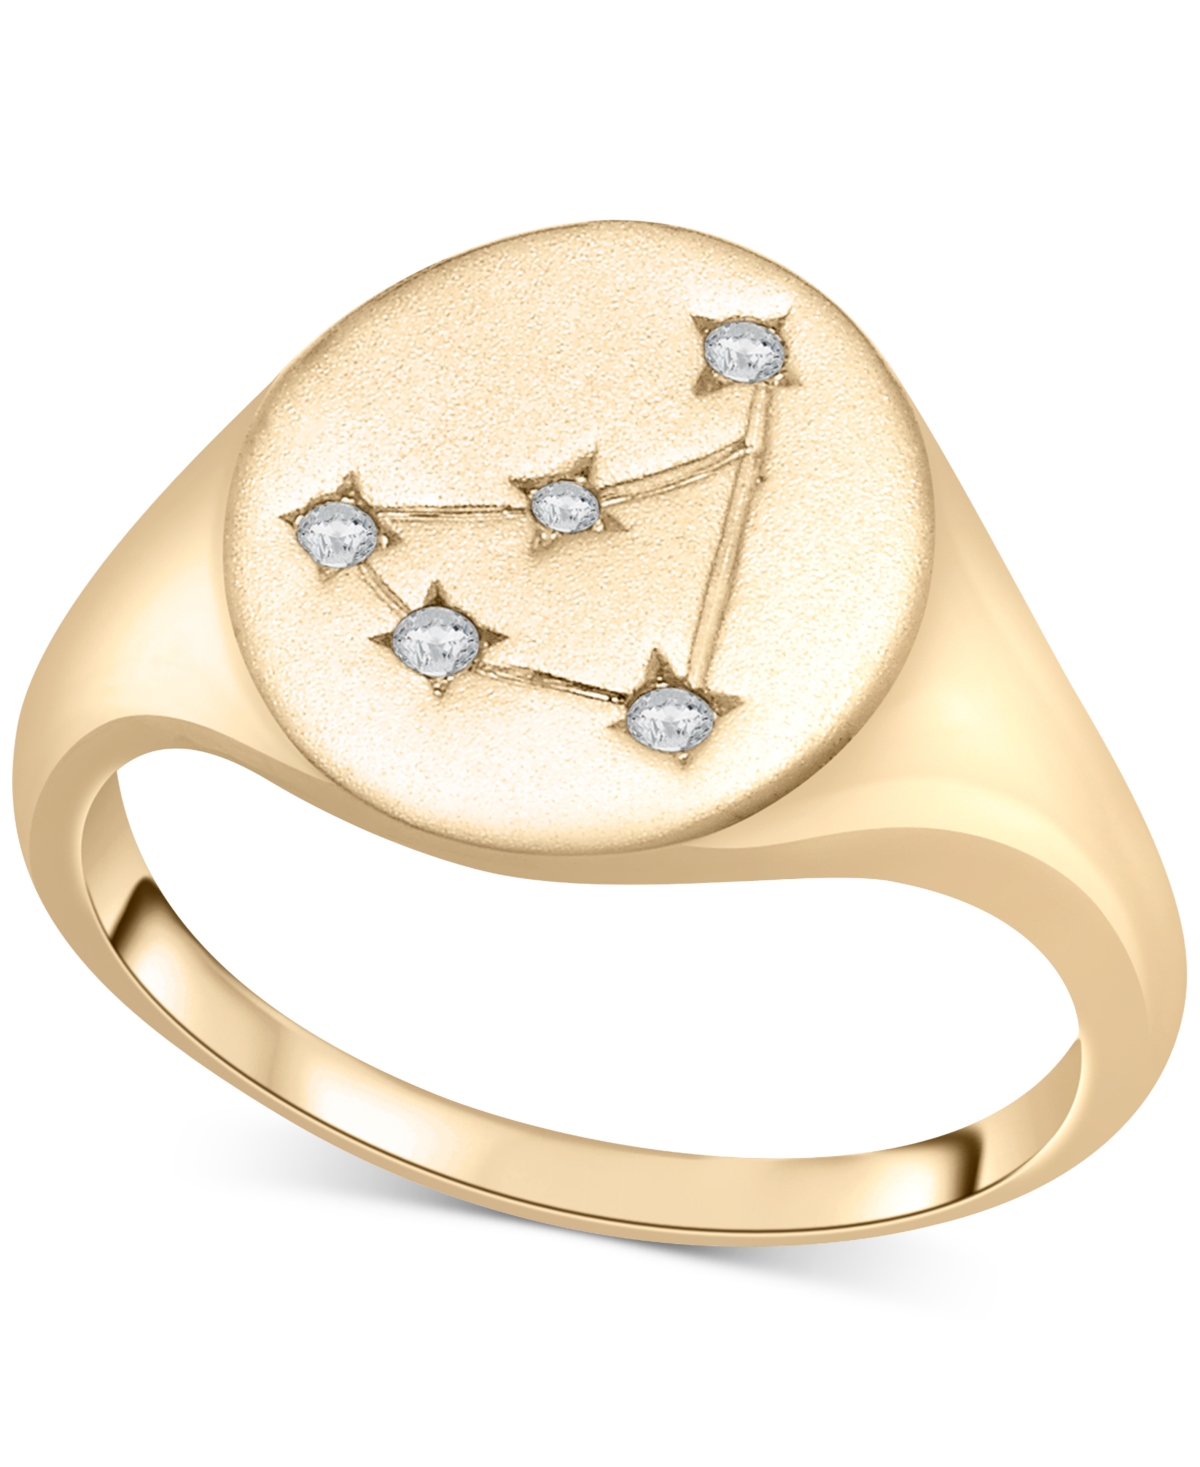 Diamond Capricorn Constellation Ring (1/20 ct. t.w.) in 10k Gold, Created for Macy's - Yellow Gold